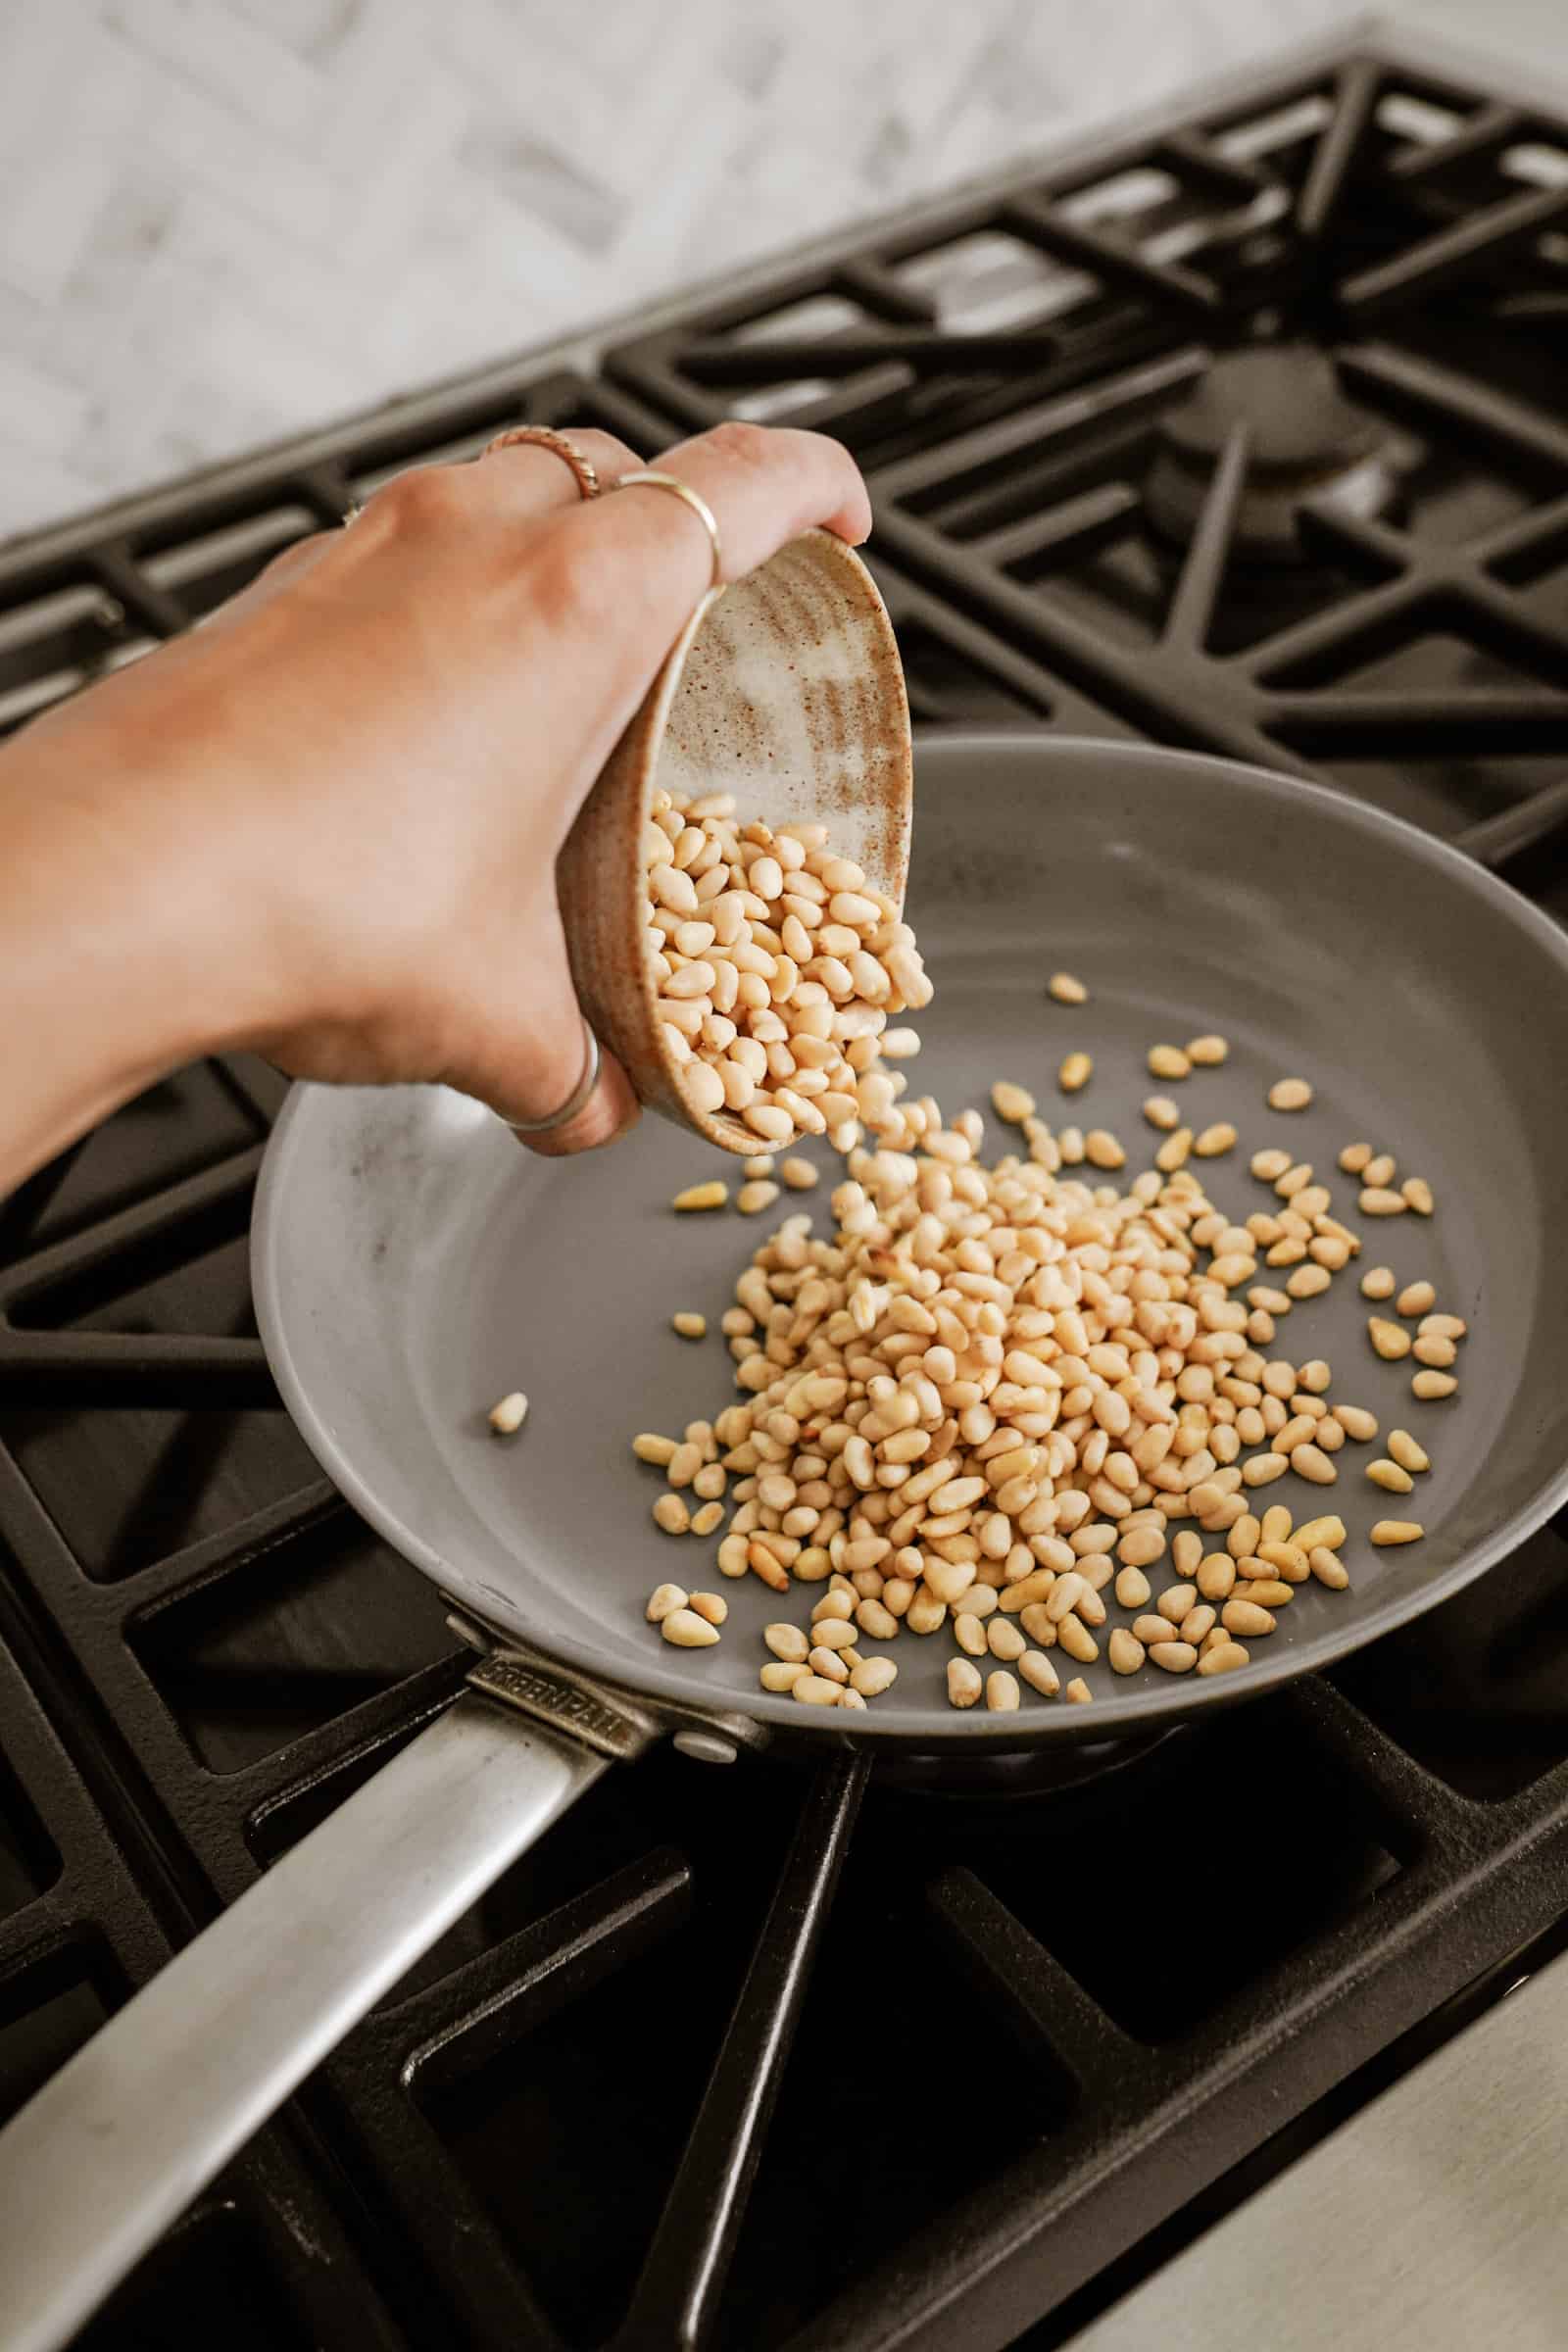 Toasting pine nuts in a pan on a stove